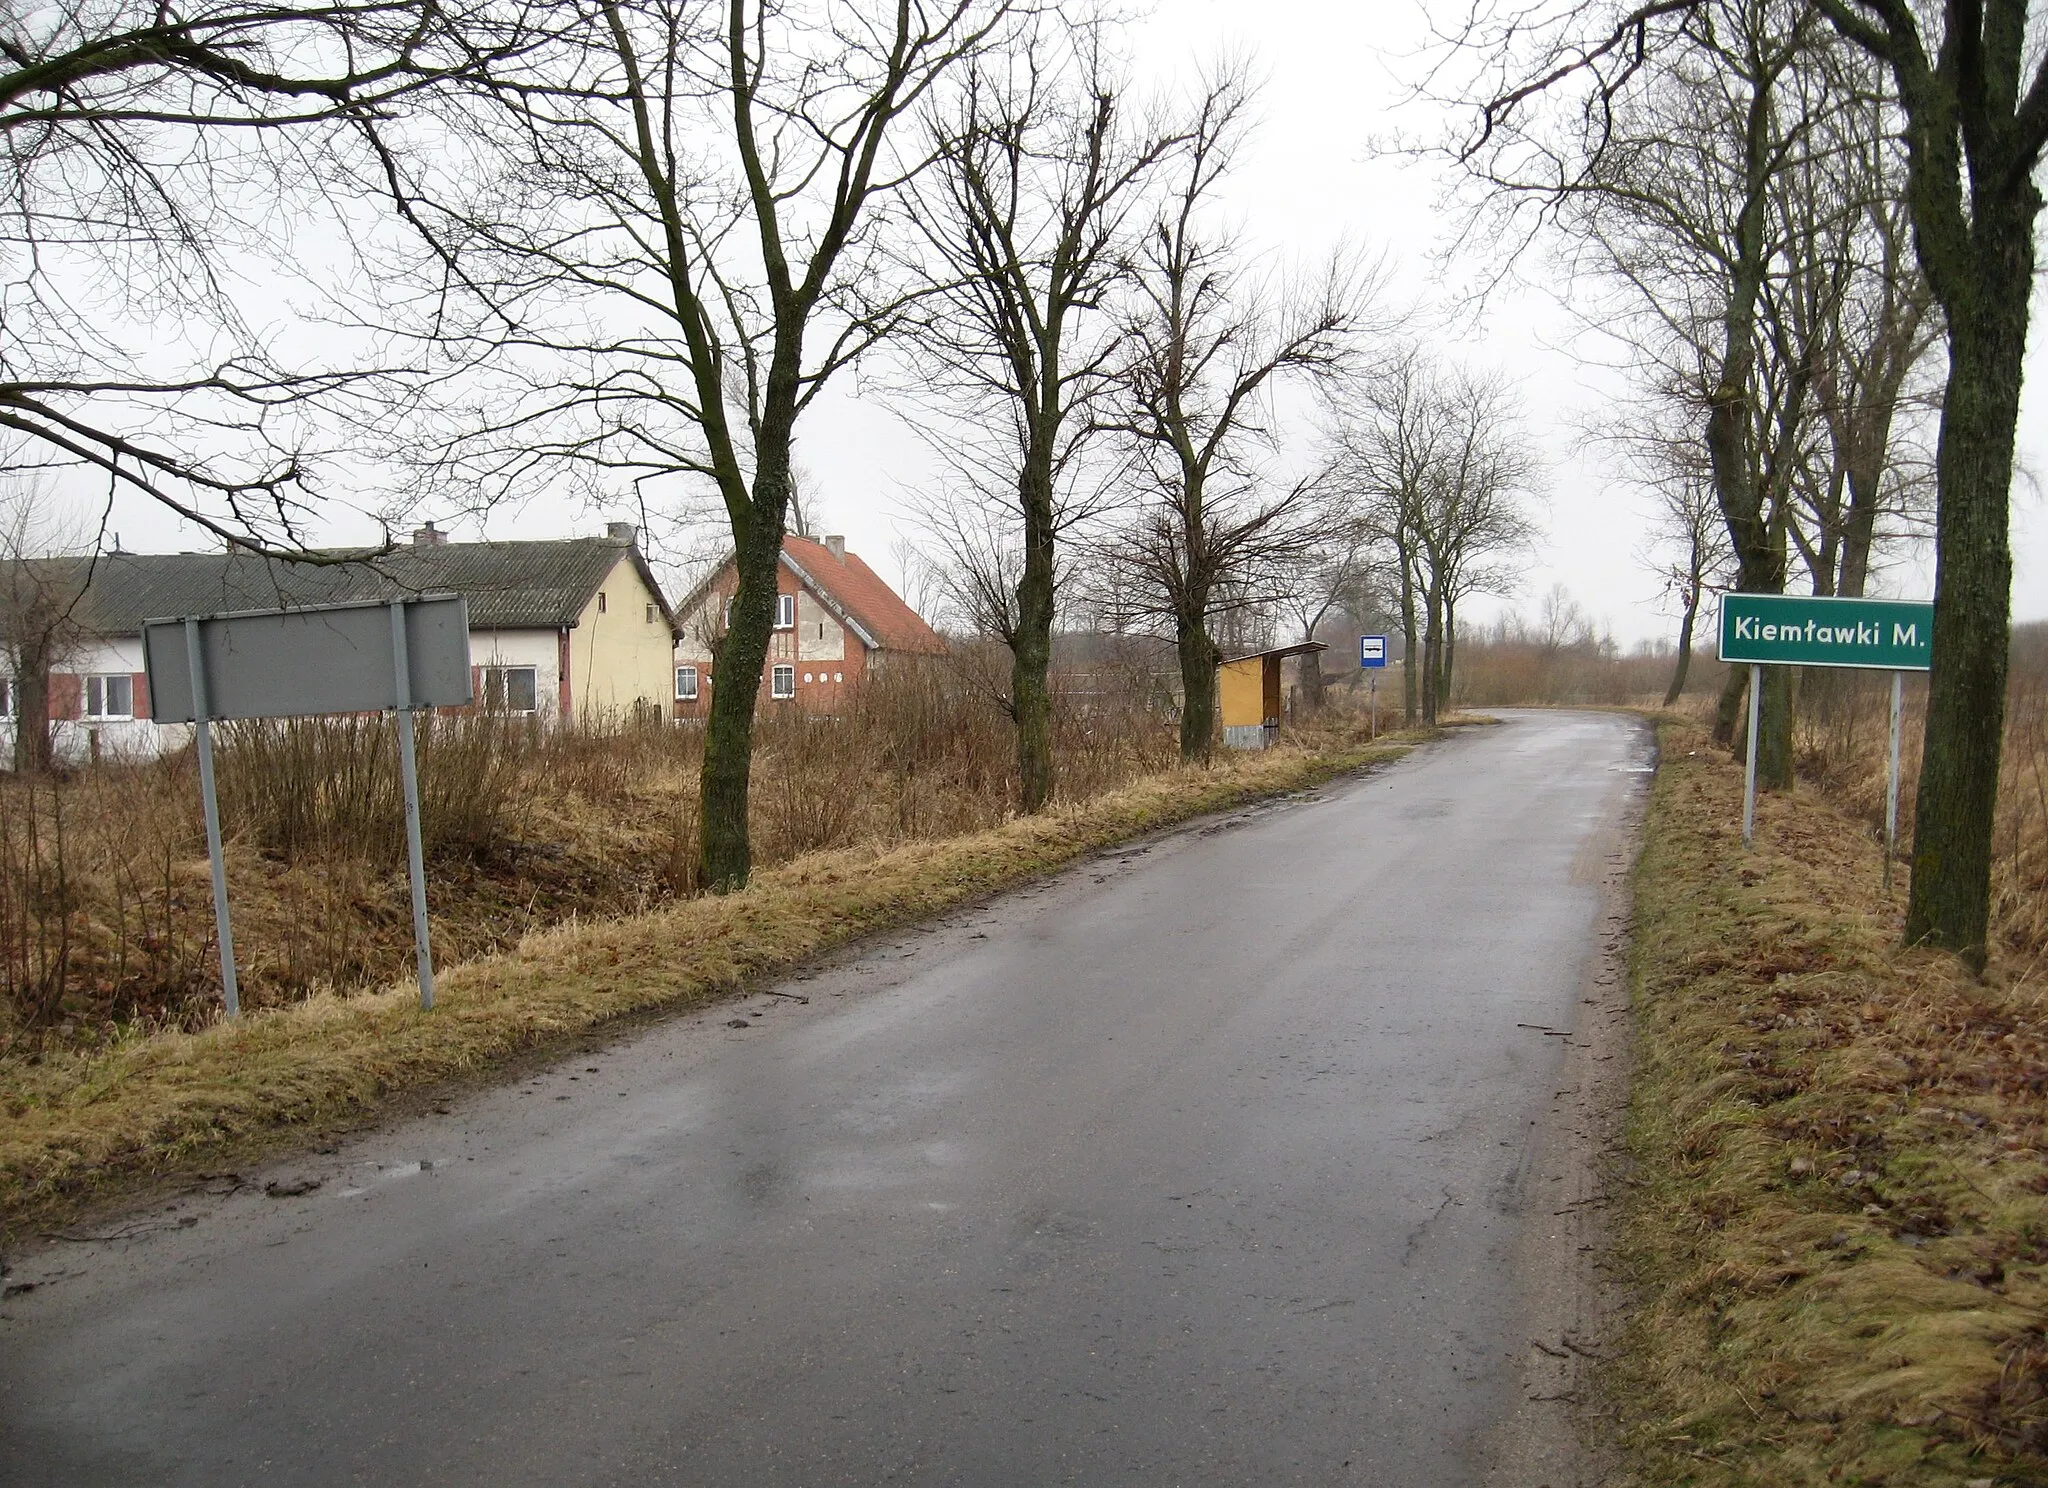 Photo showing: The village Kiemławki Małe in Poland

Camera location 54° 09′ 46″ N, 21° 19′ 14″ E View this and other nearby images on: OpenStreetMap 54.162778;   21.320556